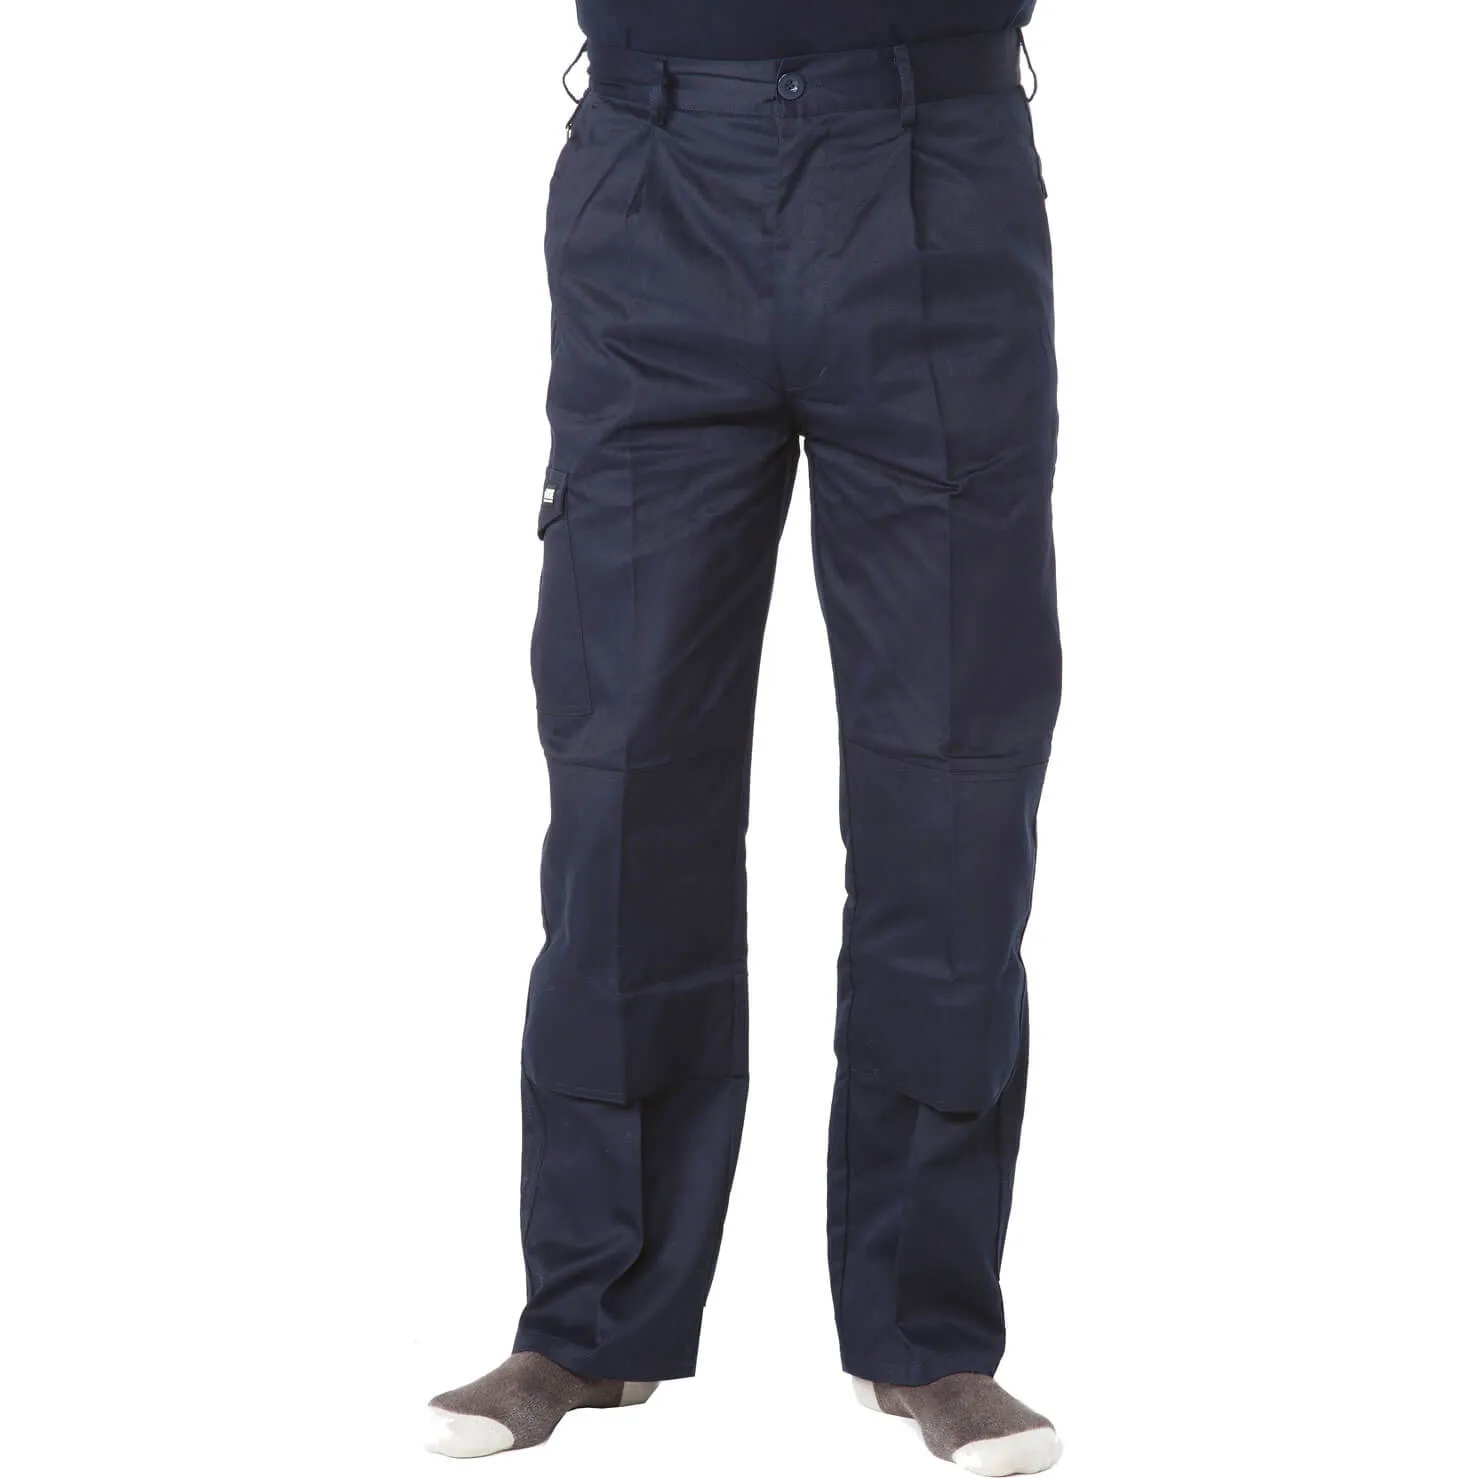 Apache Mens Industry Trousers - Navy Blue, 42", 33"